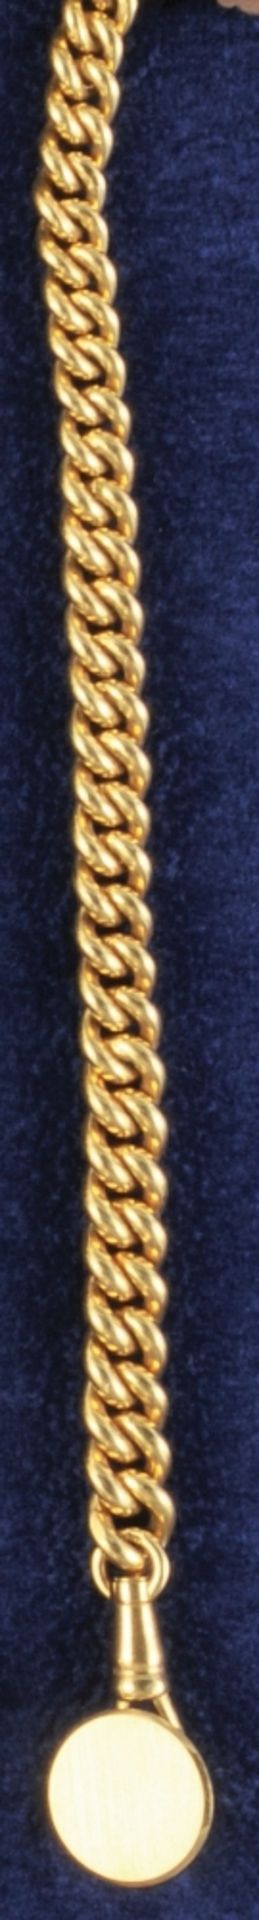 Heavy 18 ct. gold pocket watch chain by IWC,